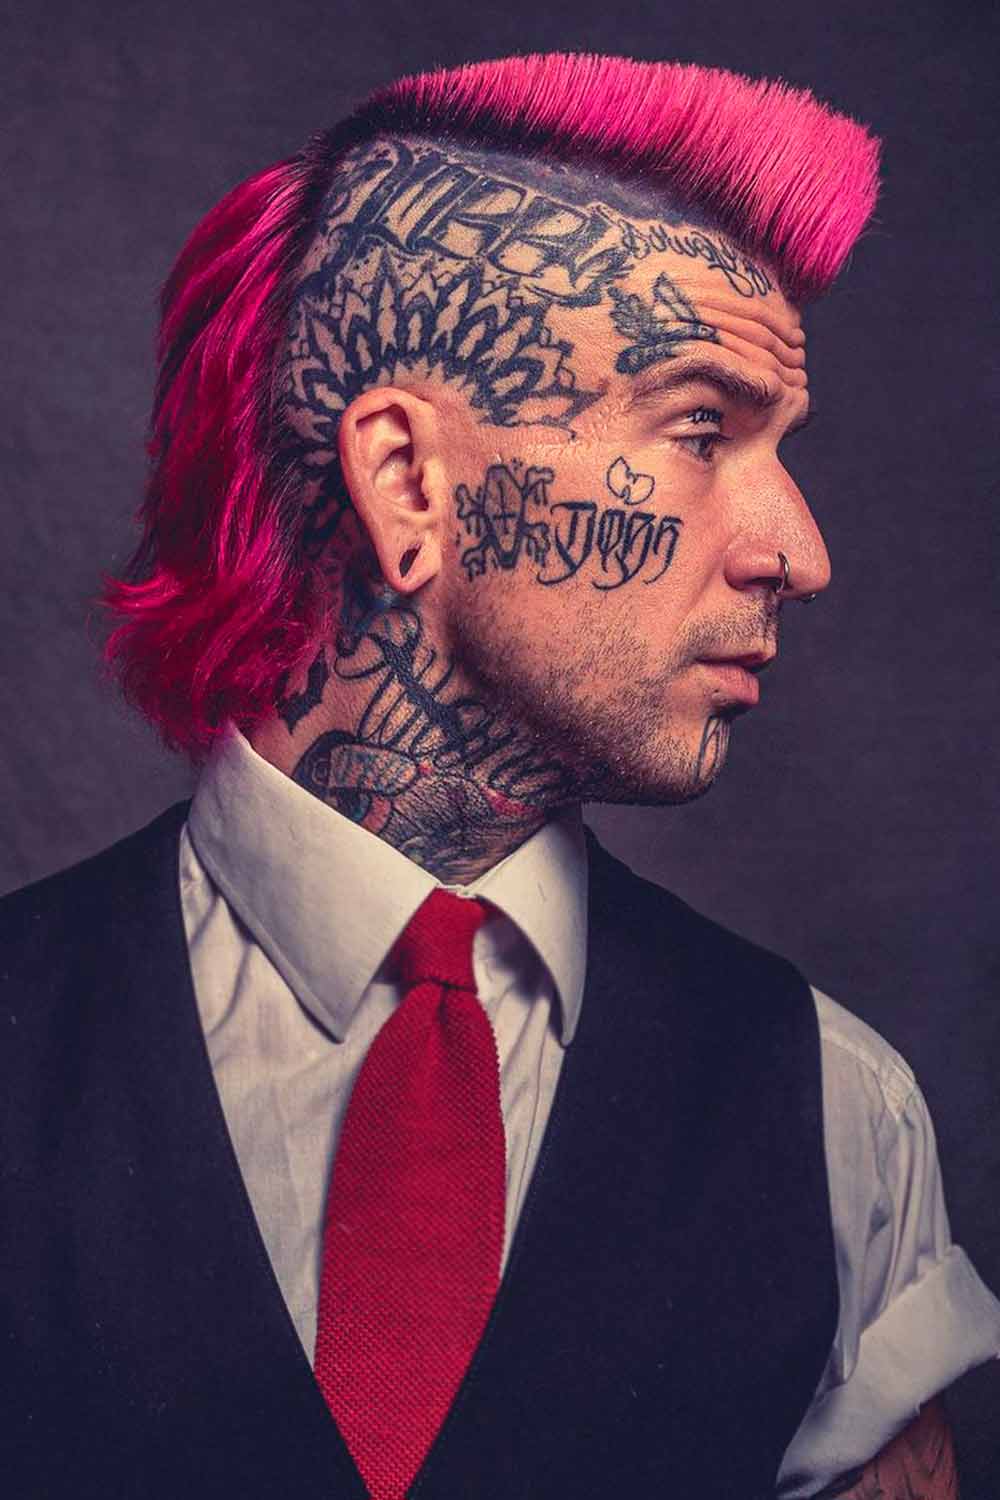 20 Most Unprofessional Hairstyles for Men (2024) - The Trend Spotter